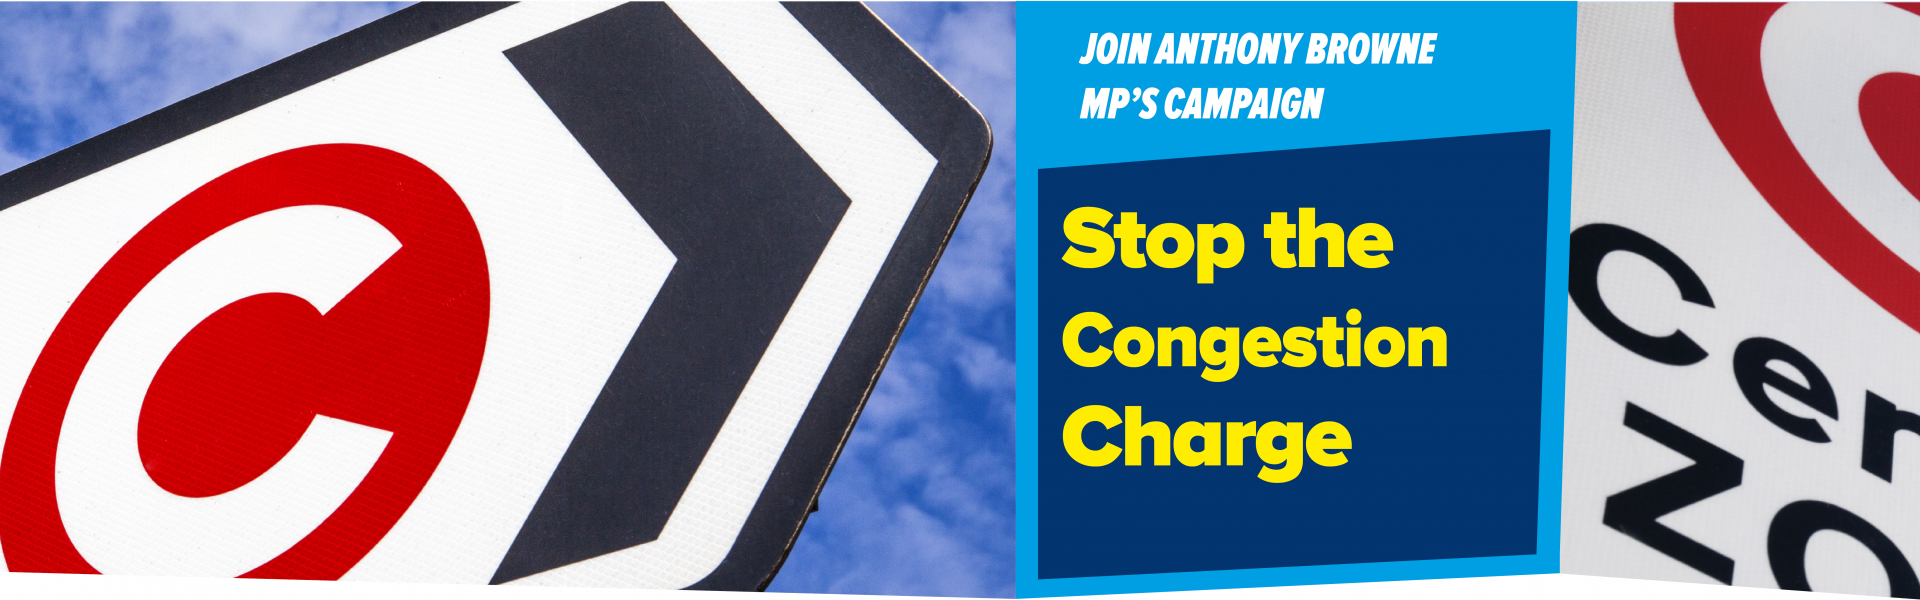 Anthony Browne MP Congestion Charge